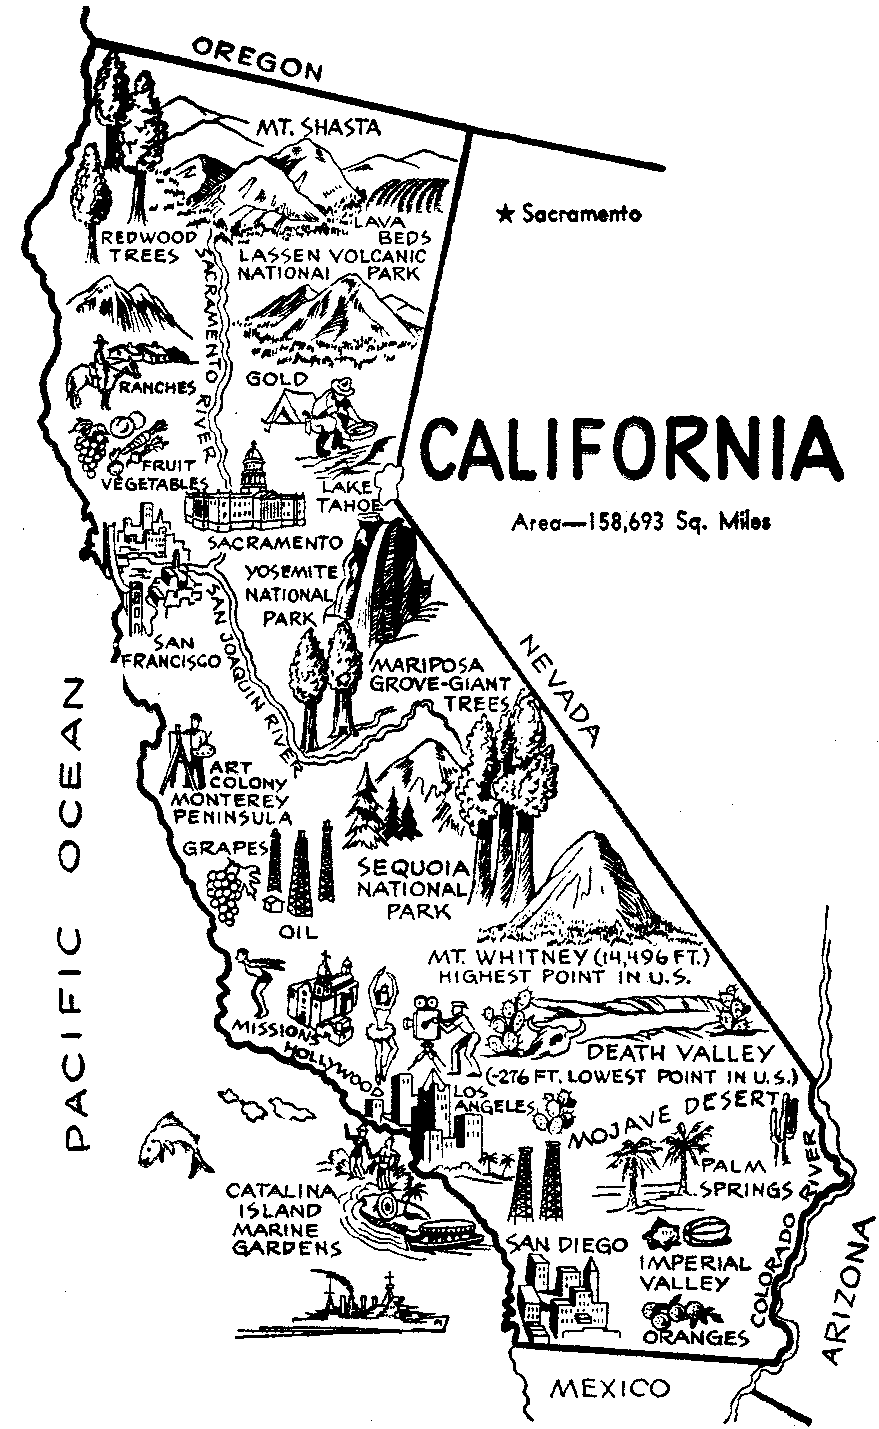 California map clip art. Missions clipart state